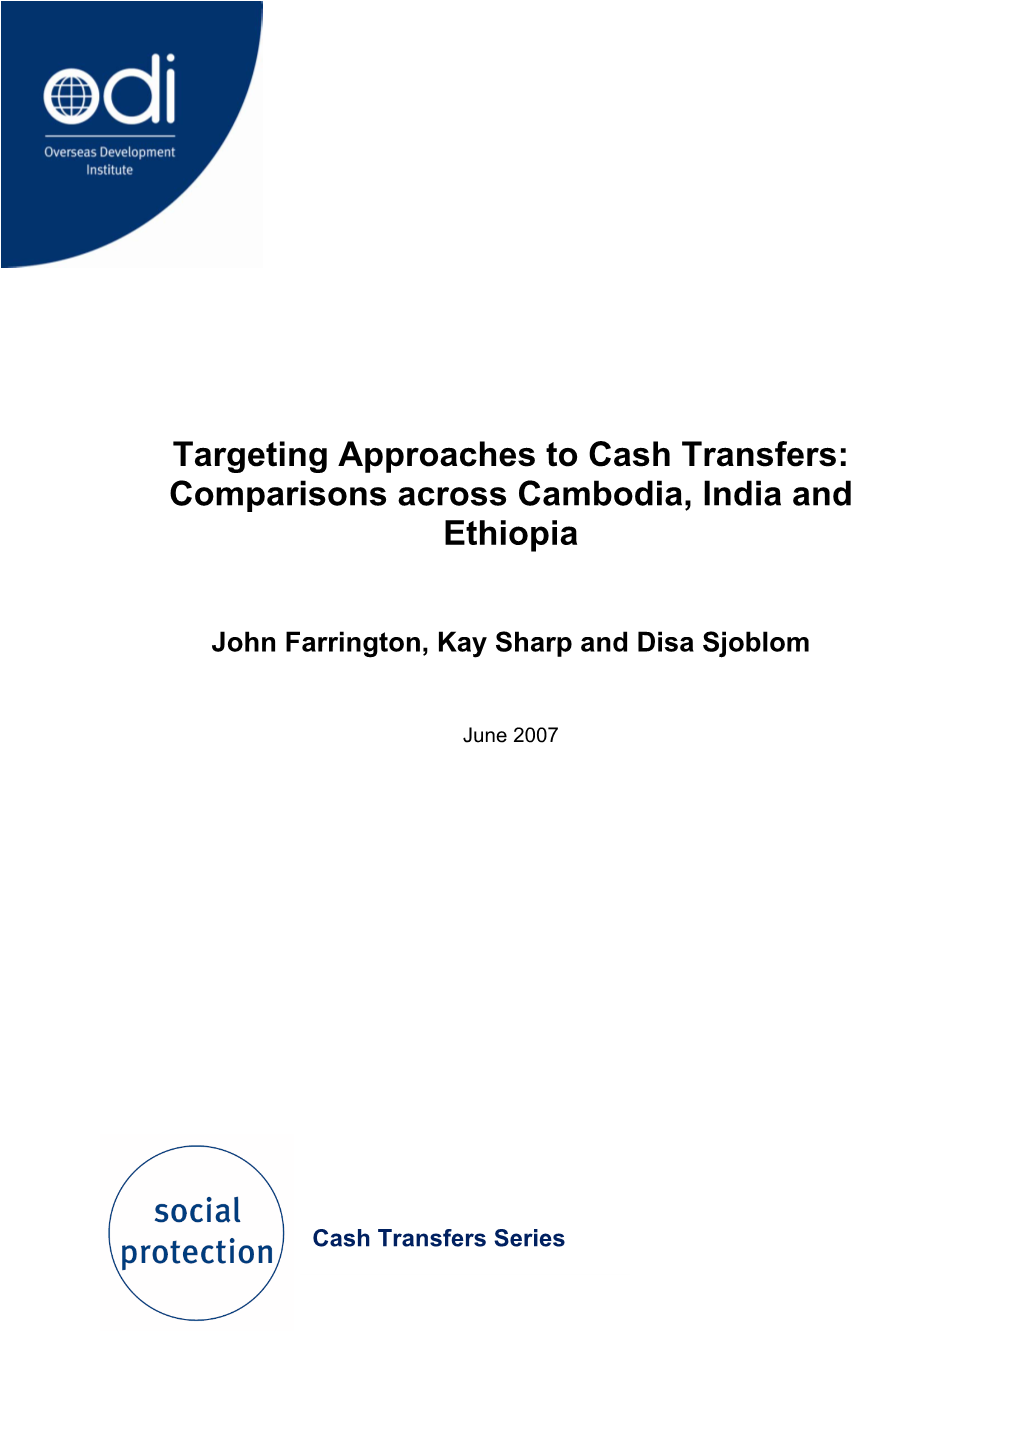 Targeting Approaches to Cash Transfers: Comparisons Across Cambodia, India and Ethiopia